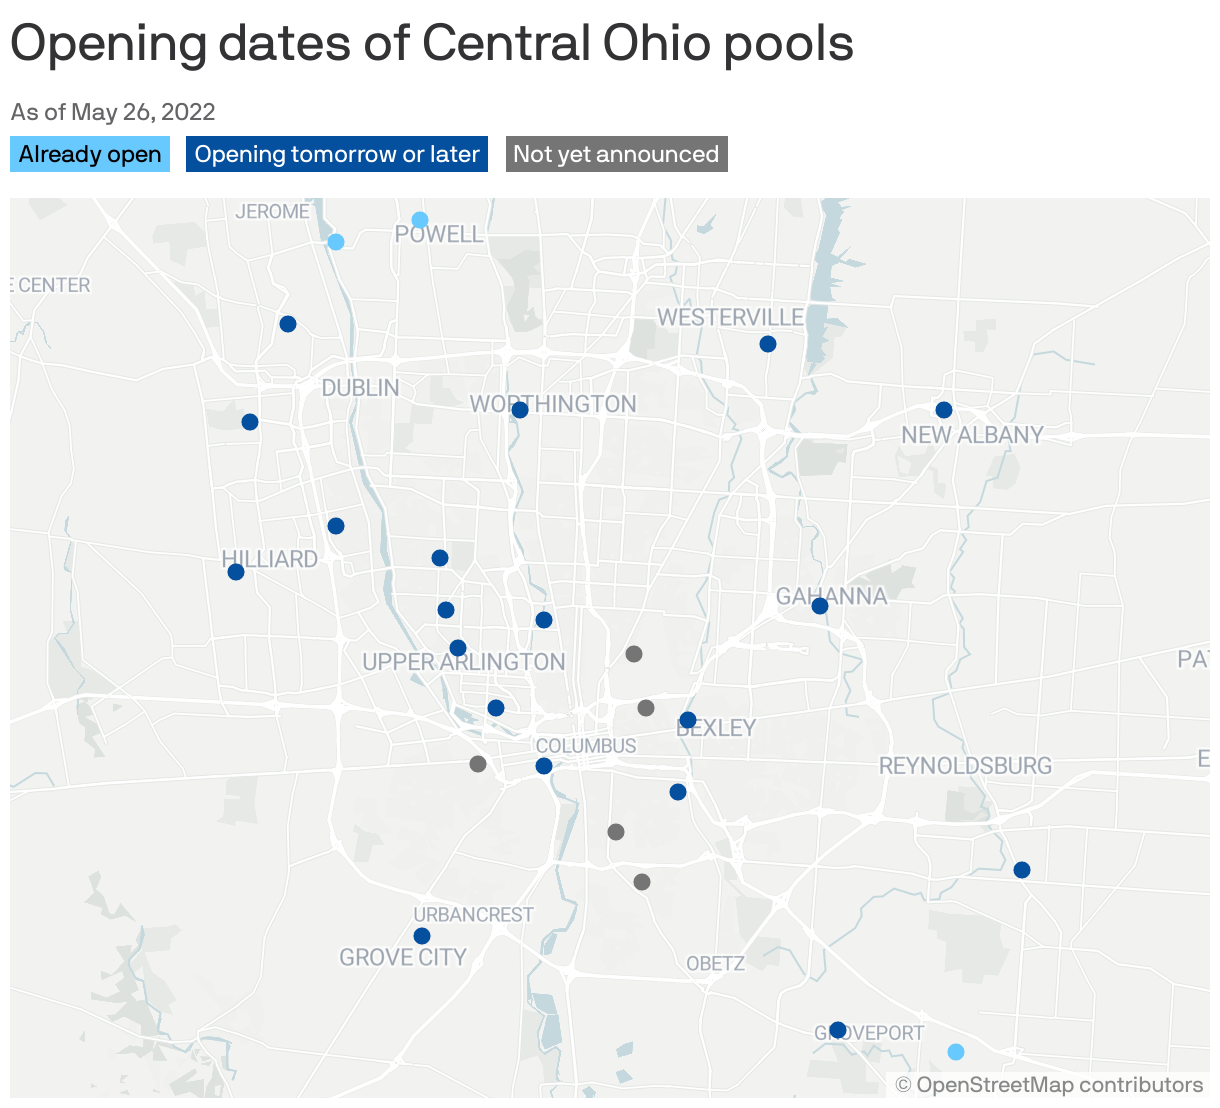 Opening dates of Central Ohio pools